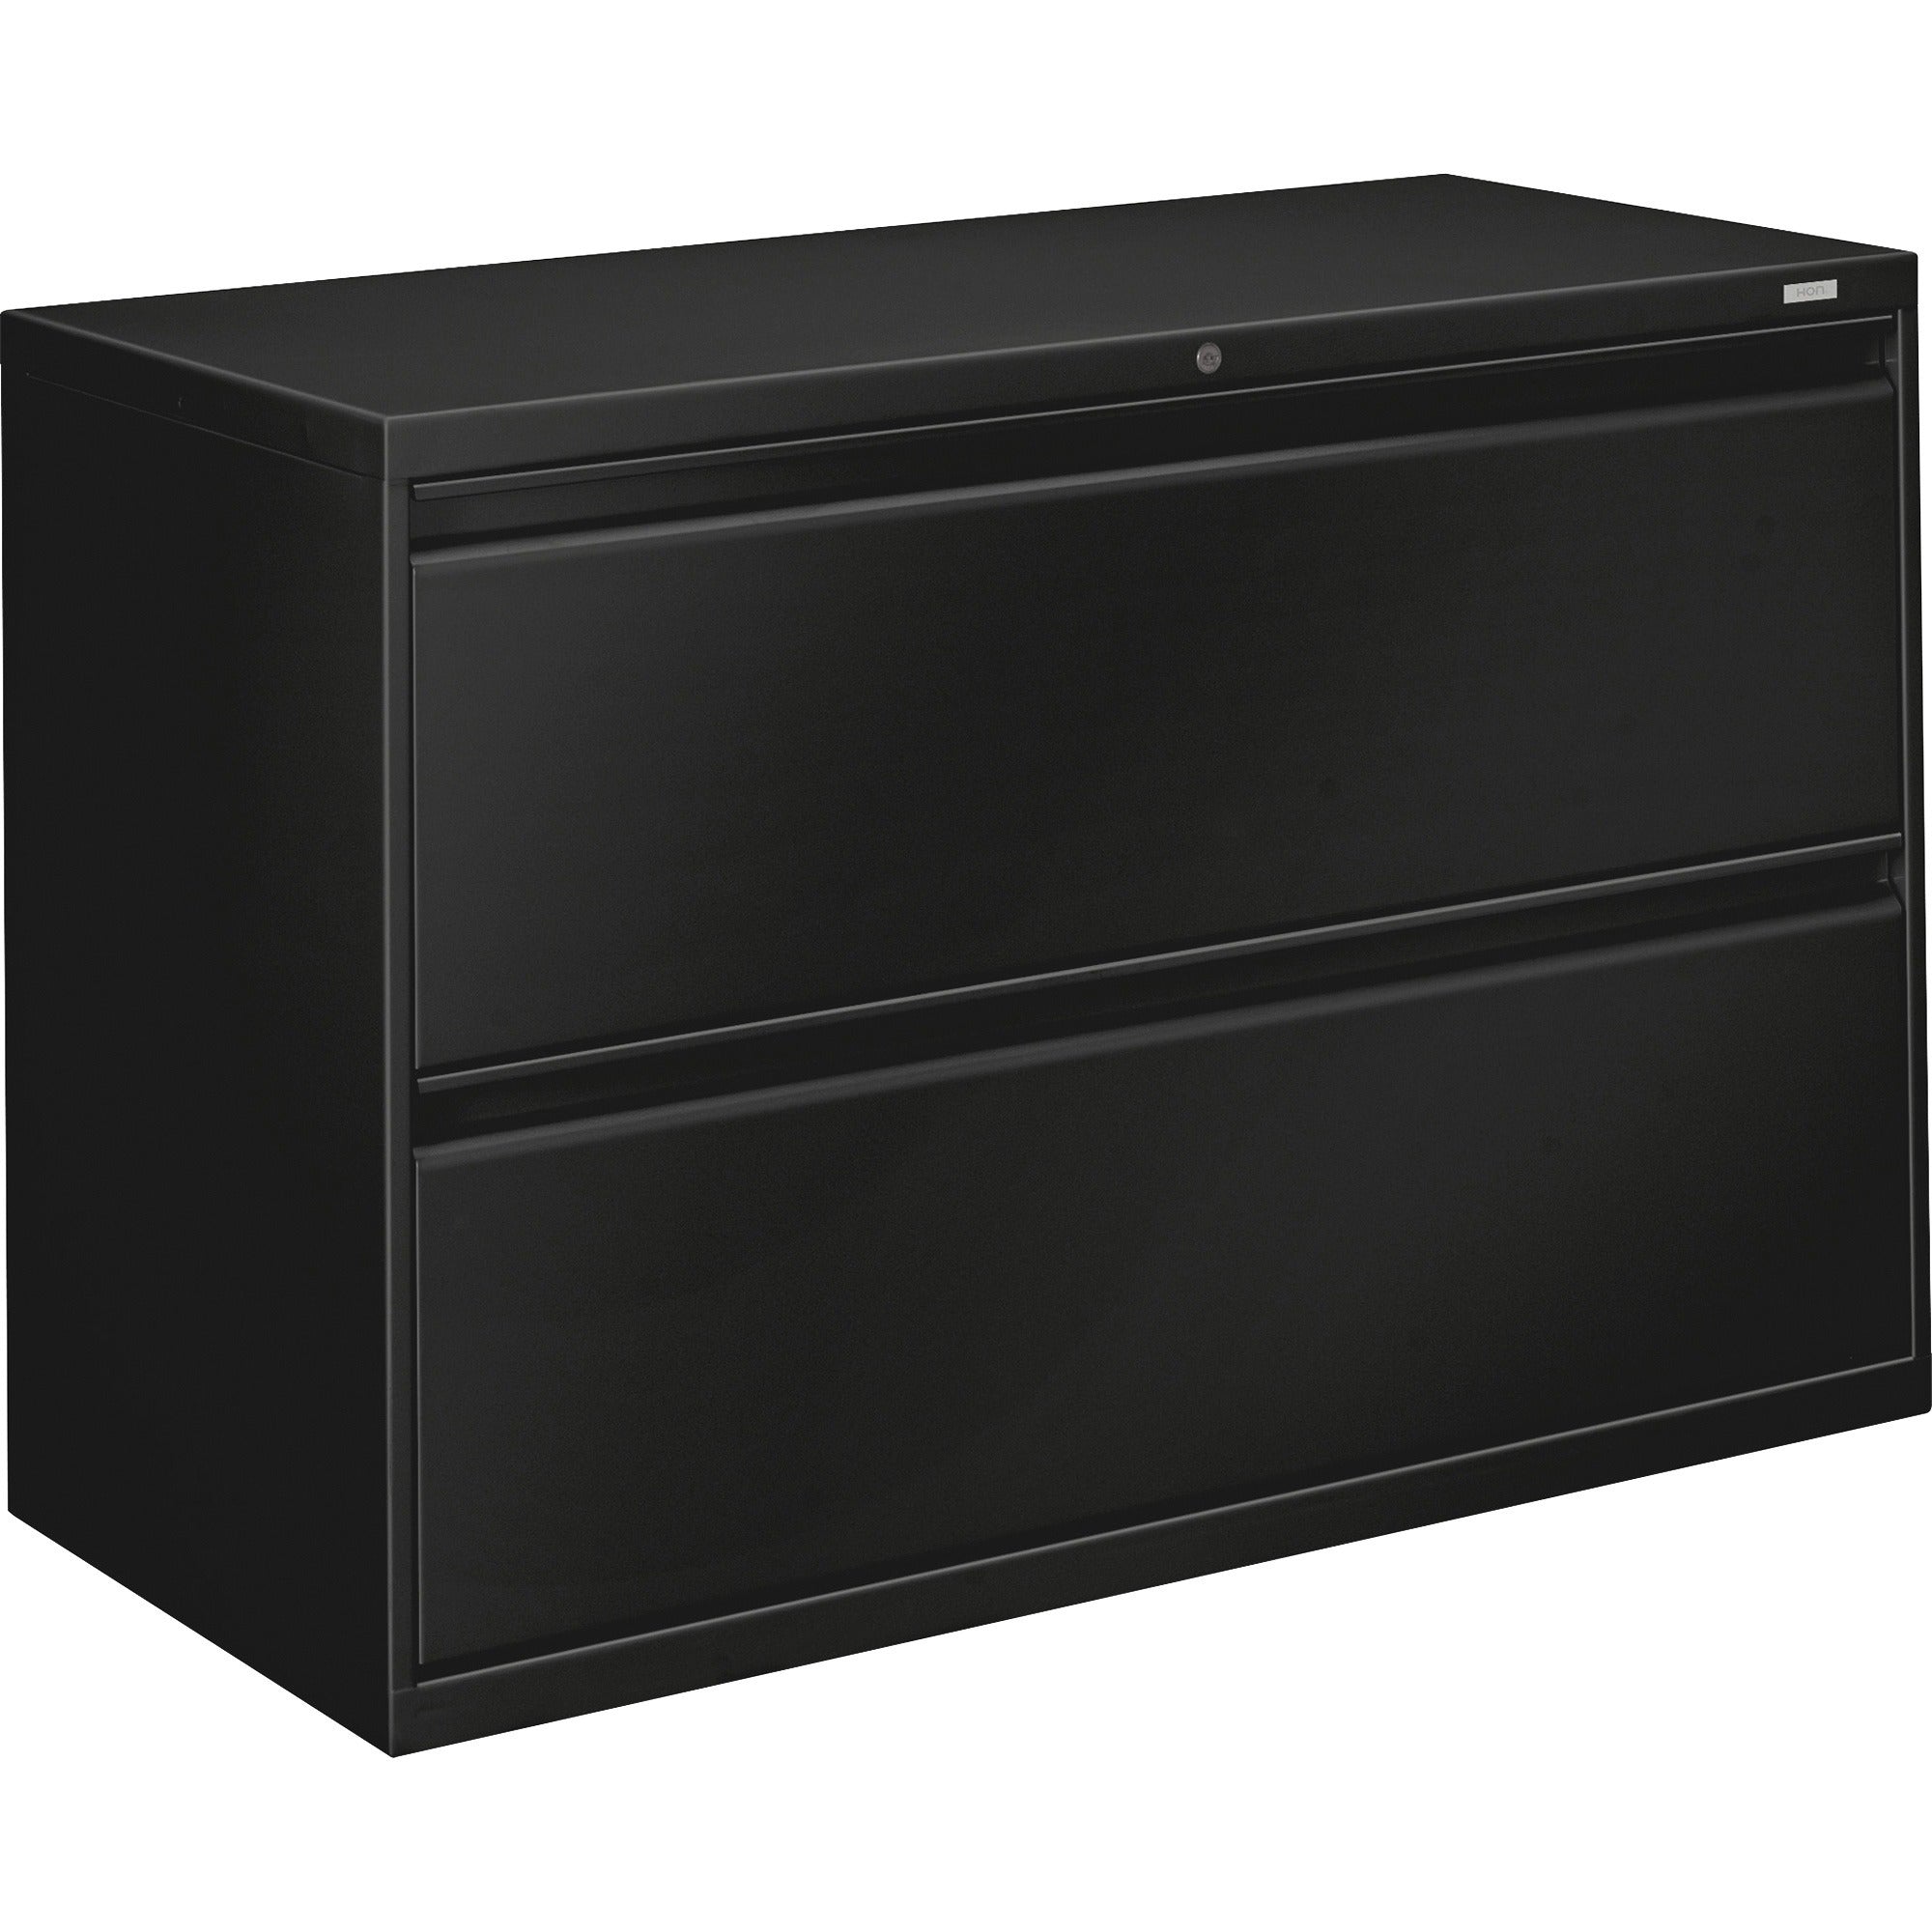 hon-800-series-full-pull-locking-lateral-file-2-drawer-42-x-193-x-284-2-x-drawers-lateral-black-baked-enamel-steel-recycled_hon892lp - 1